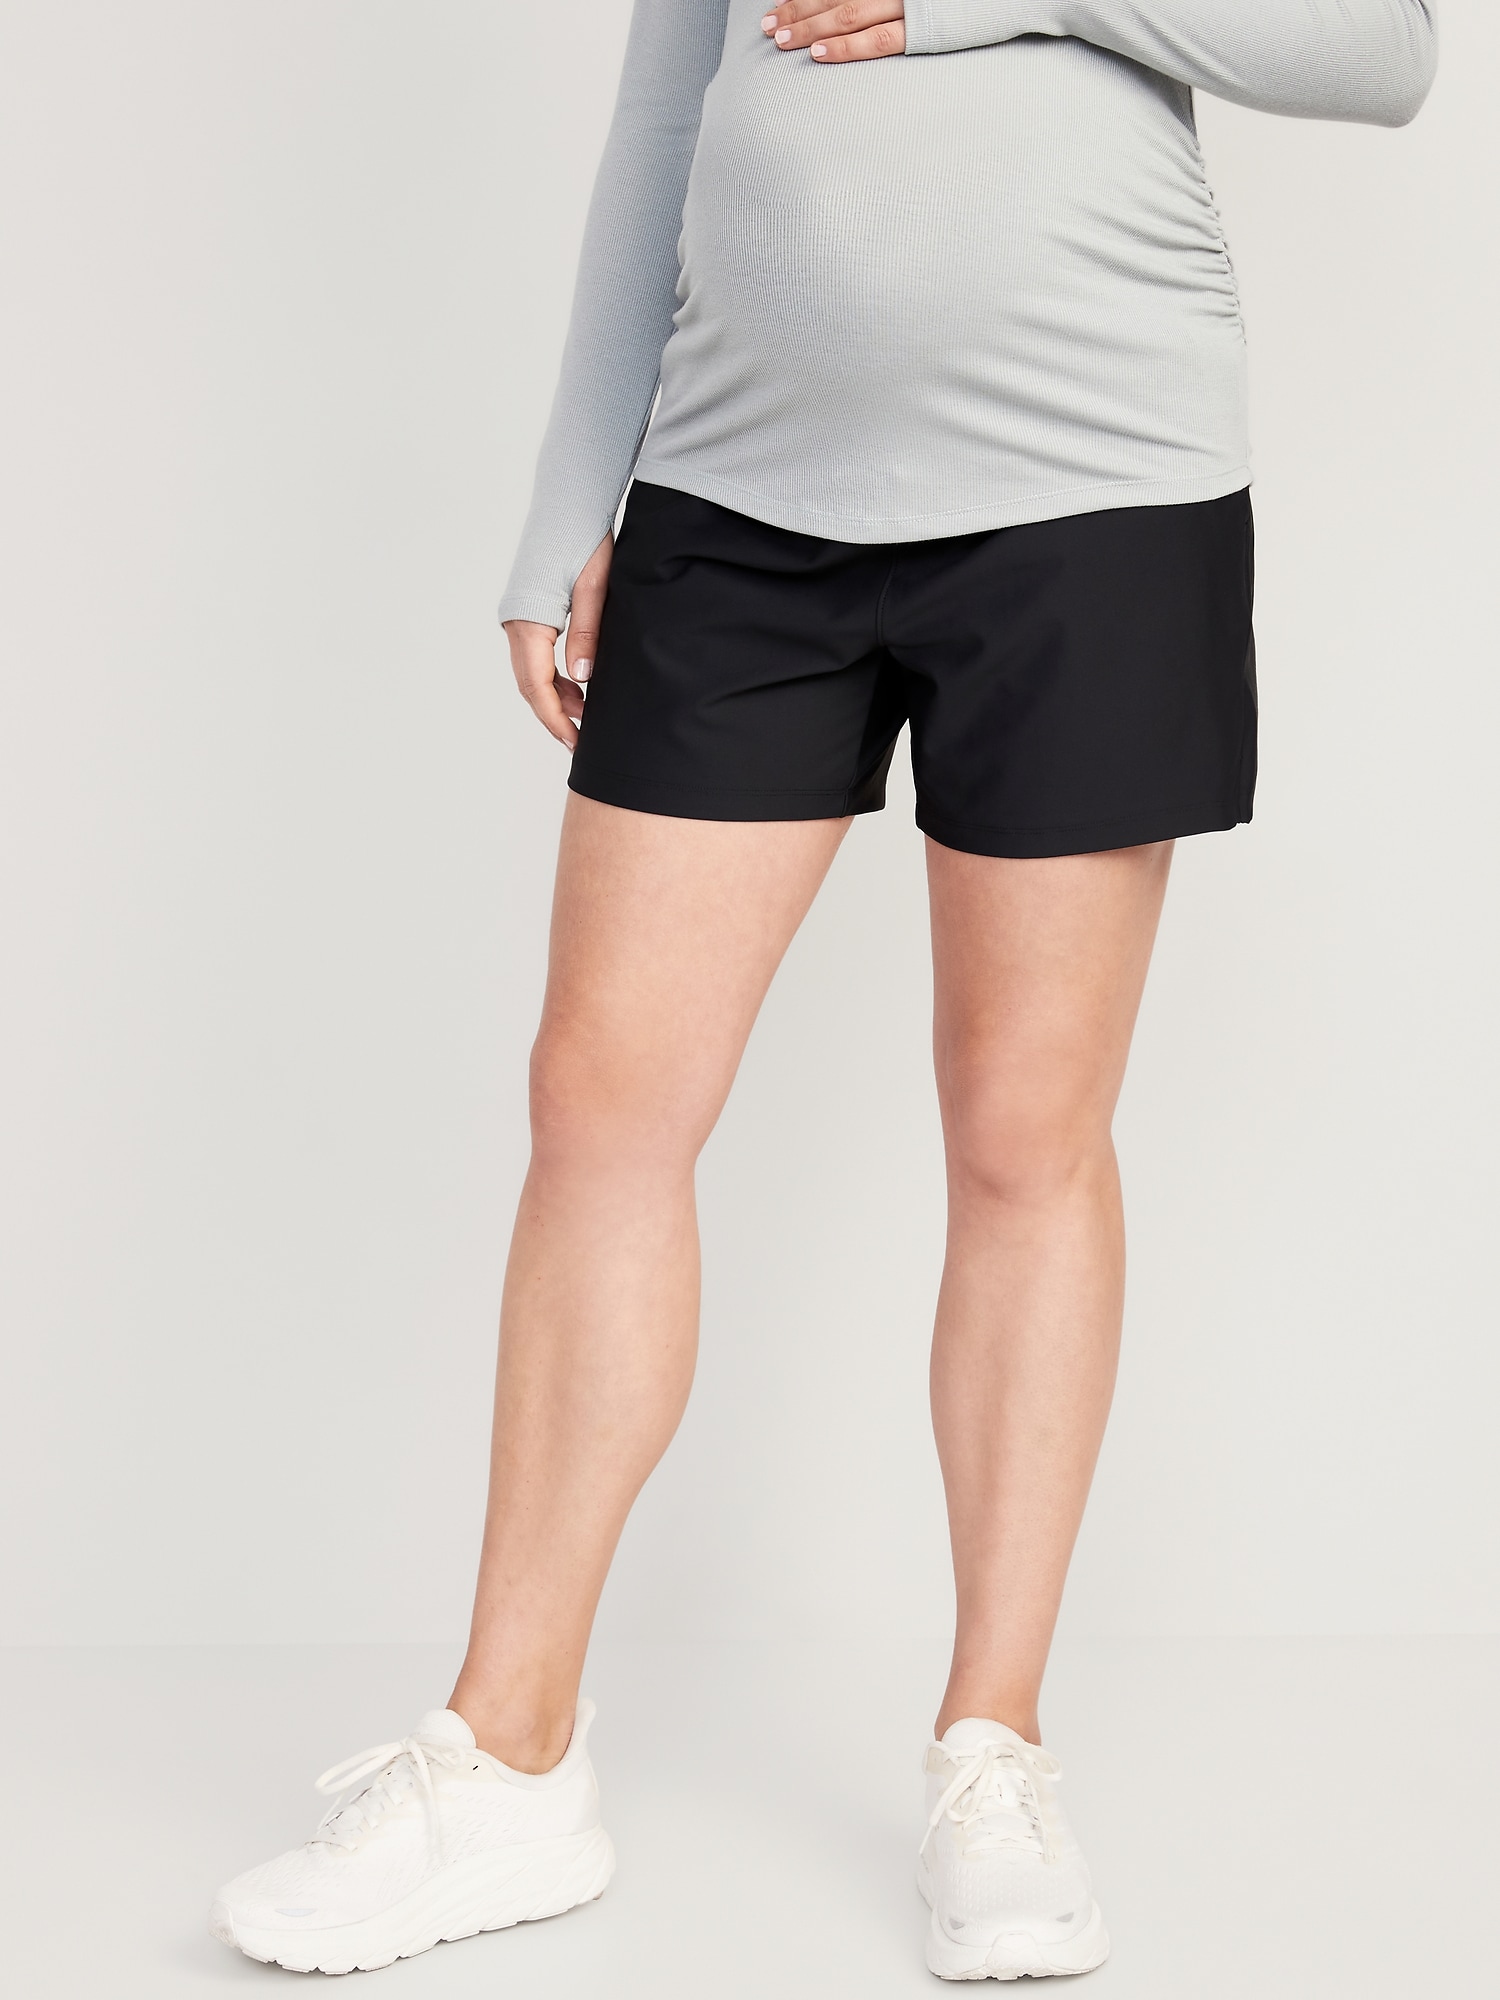 Maternity Clothes for Yoga